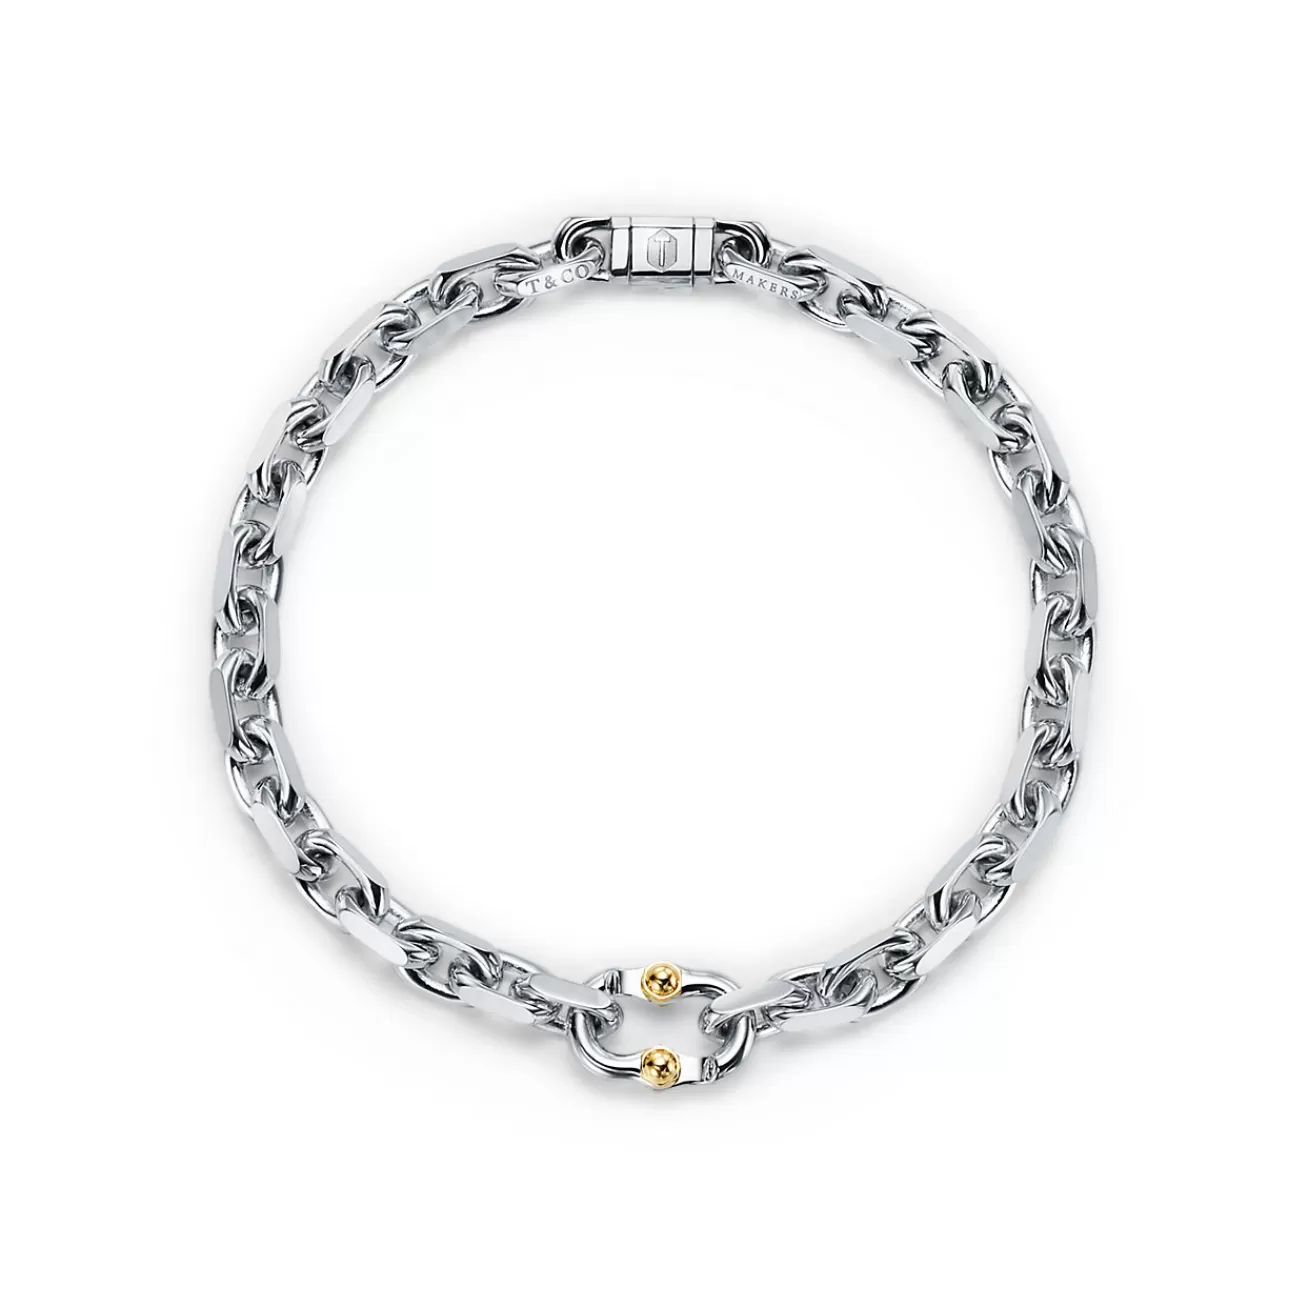 Tiffany & Co. Tiffany 1837® Makers narrow chain bracelet in sterling silver and gold, medium. | ^ Bracelets | Men's Jewelry